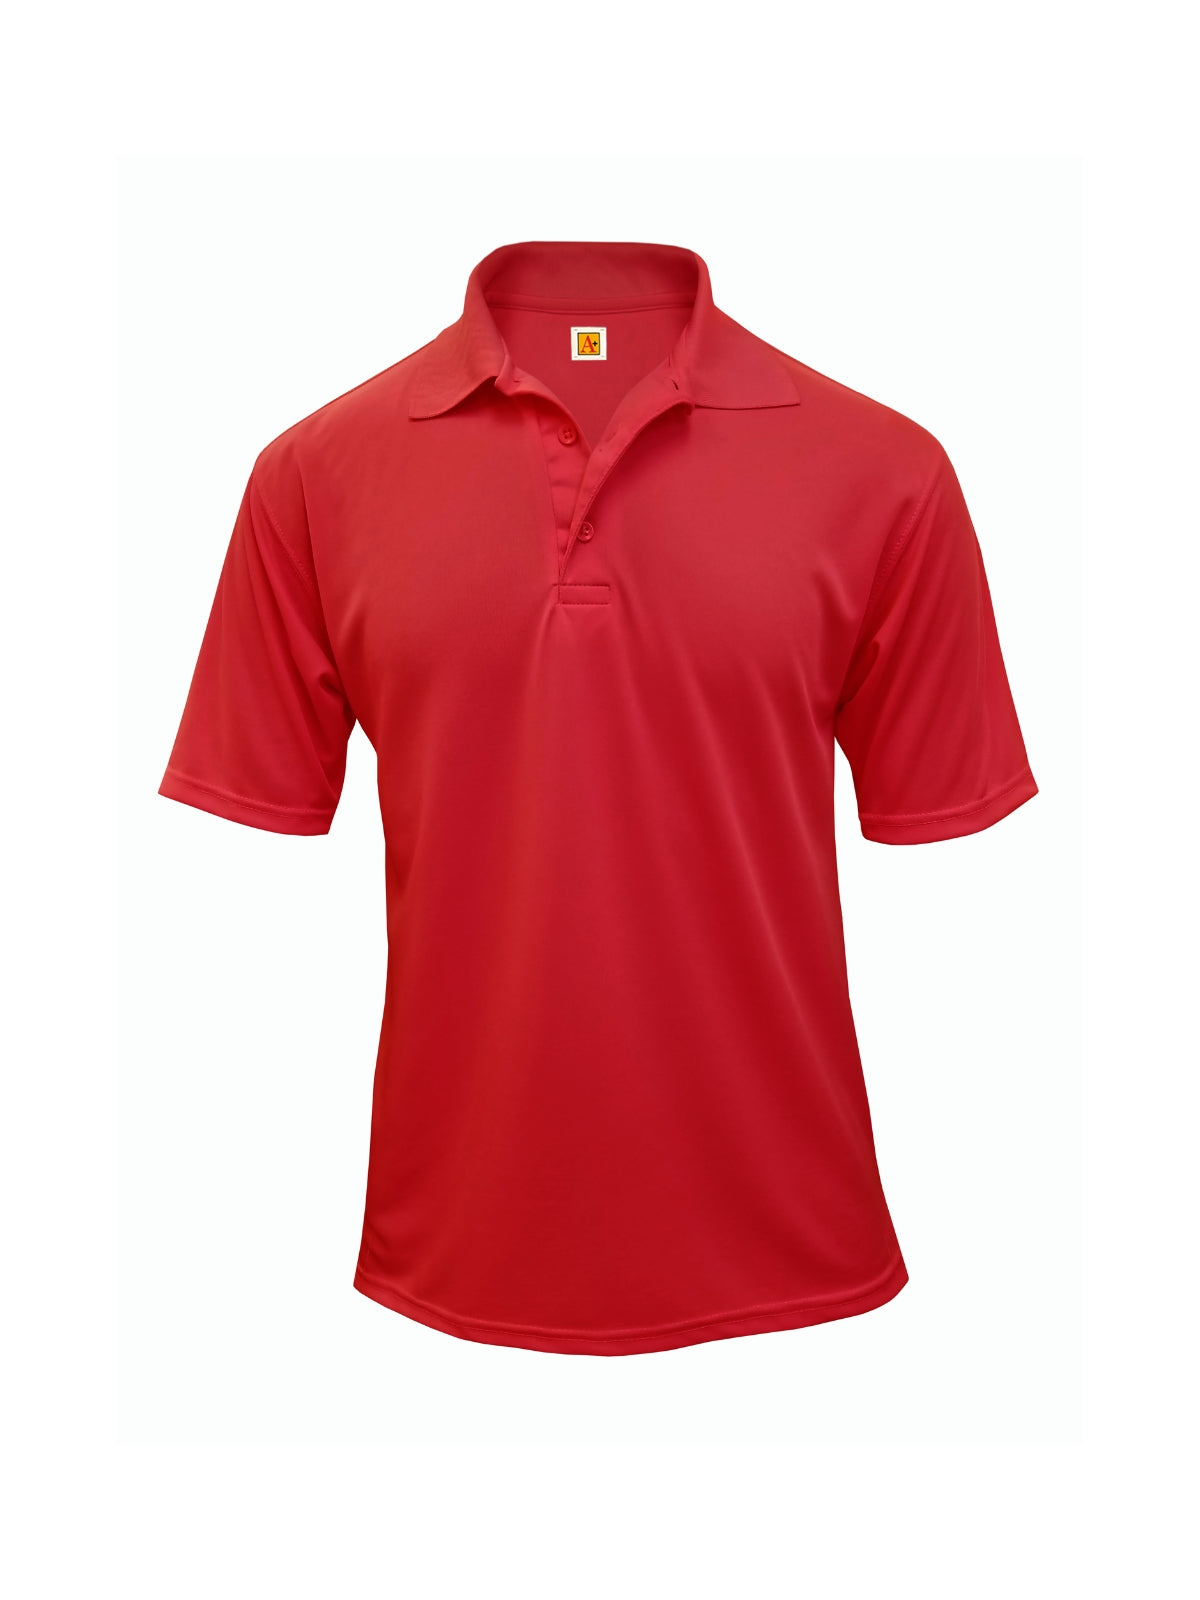 Unisex Short Sleeve Dri-Fit Polo - 8953 - Red